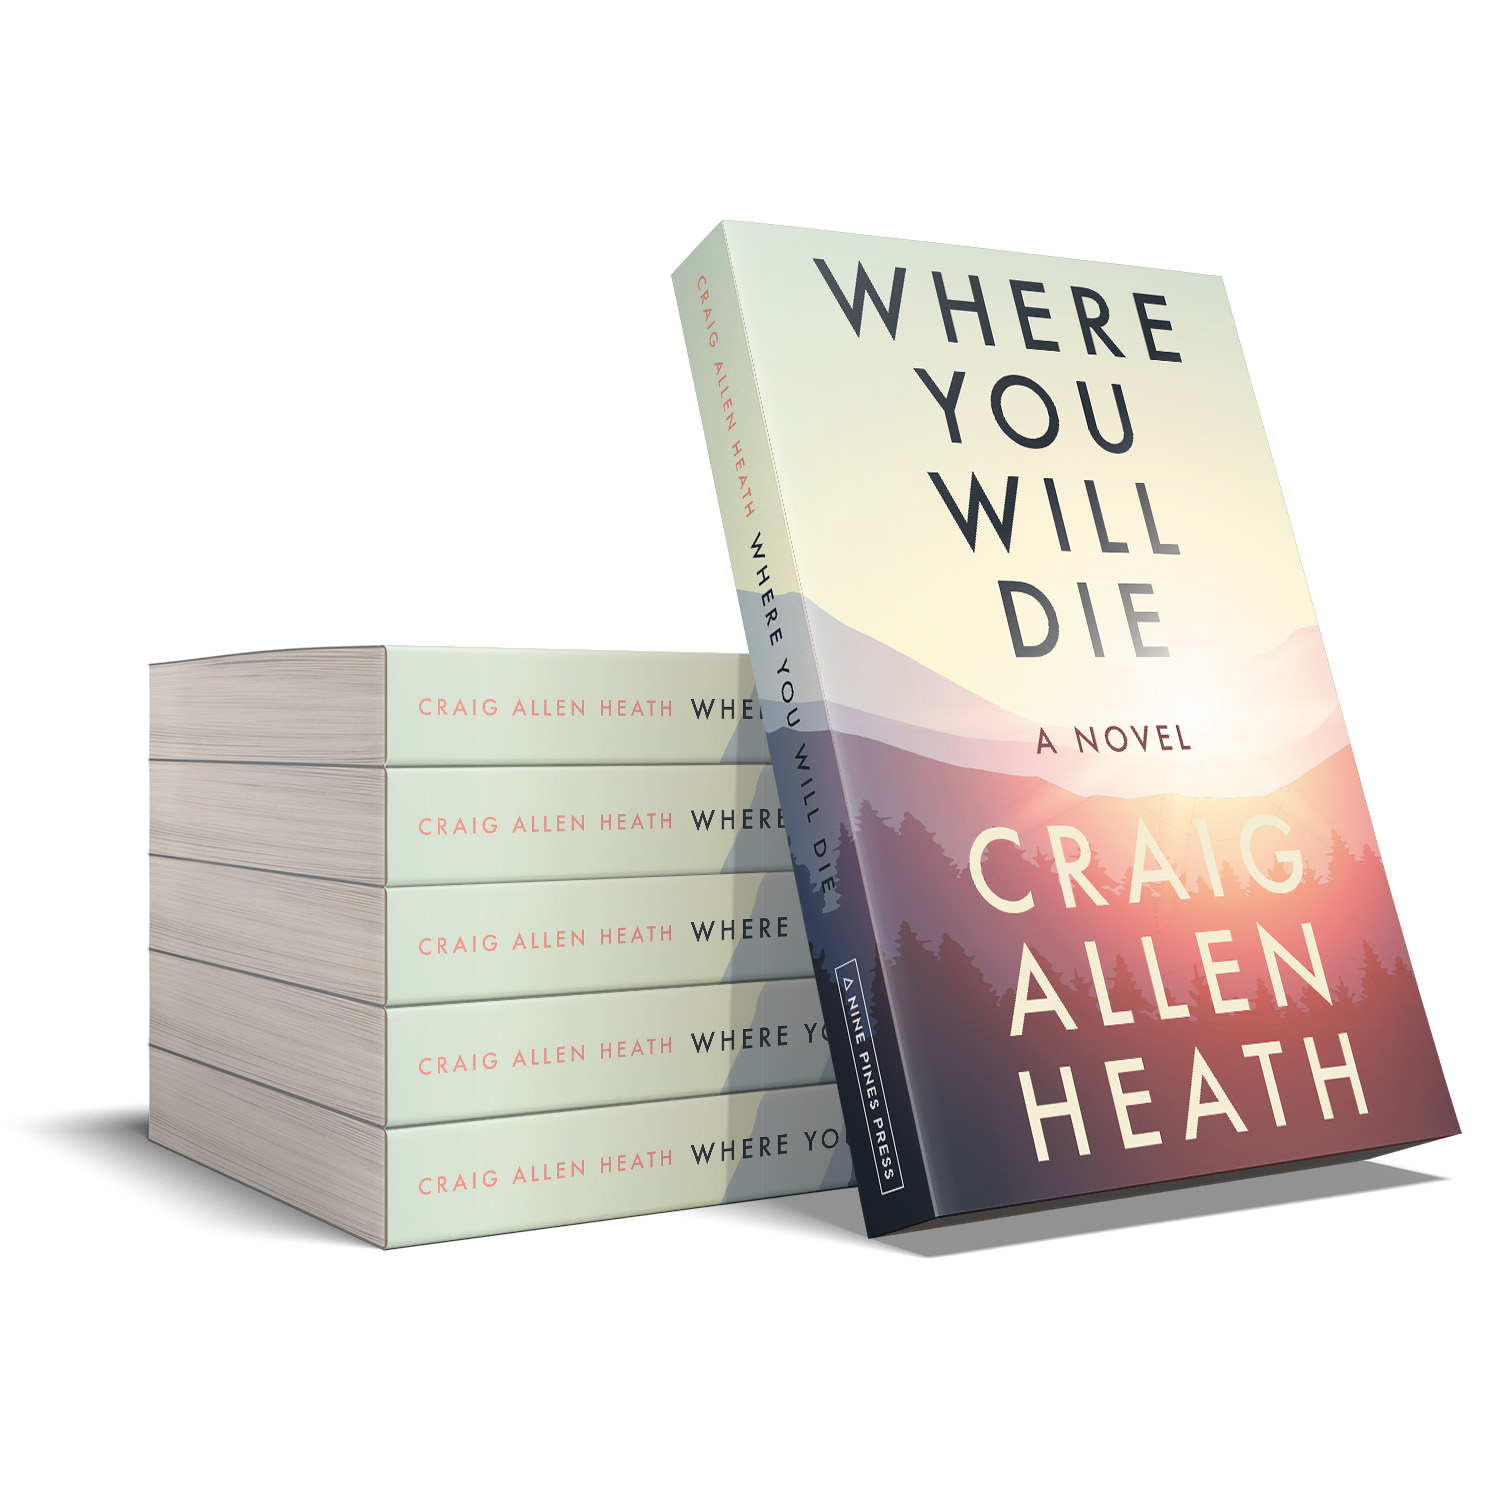 'Where You Will Die' is a deep backwoods murder fiction novel. The author is Craig Allen Heath. The book cover design & interior formatting are by Mark Thomas. To learn more about what Mark could do for your book, please visit coverness.com.